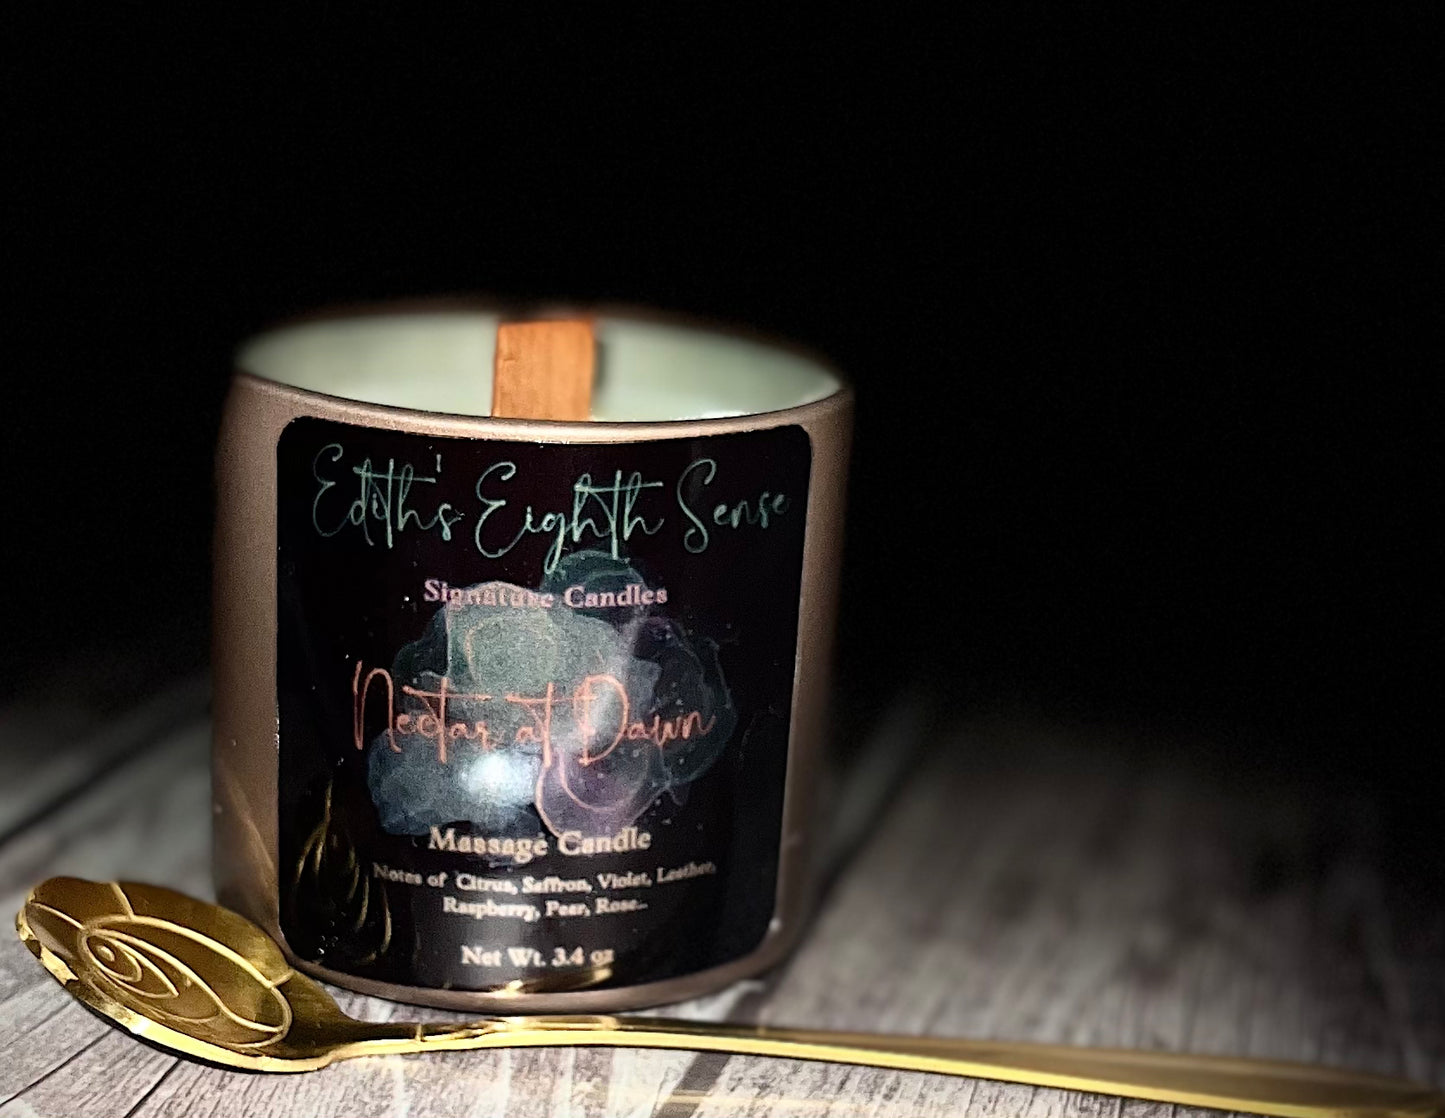 Nectar at Dawn: Massage Candle with Spoon